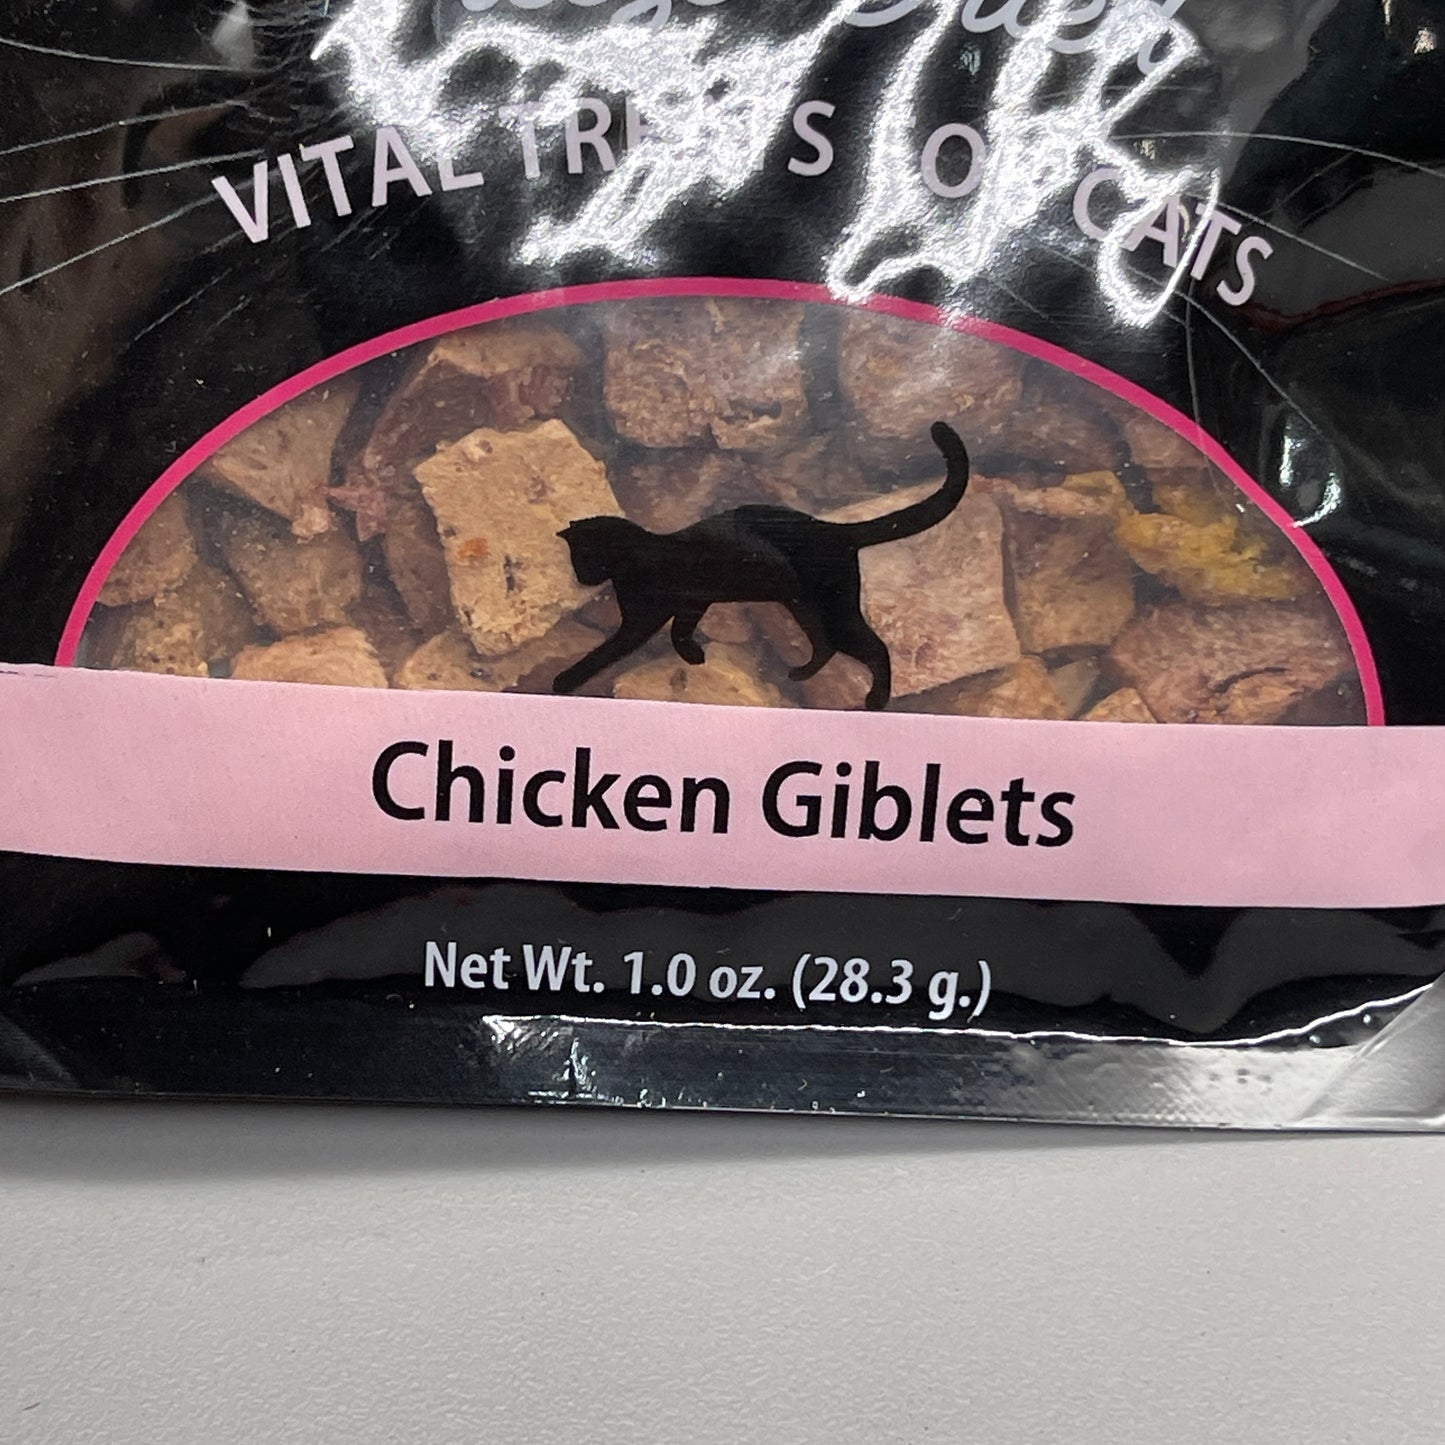 VITAL ESSENTIALS 3 Pack of Freeze-Dried Chicken Giblets Cat Treats 1 oz (10/24)